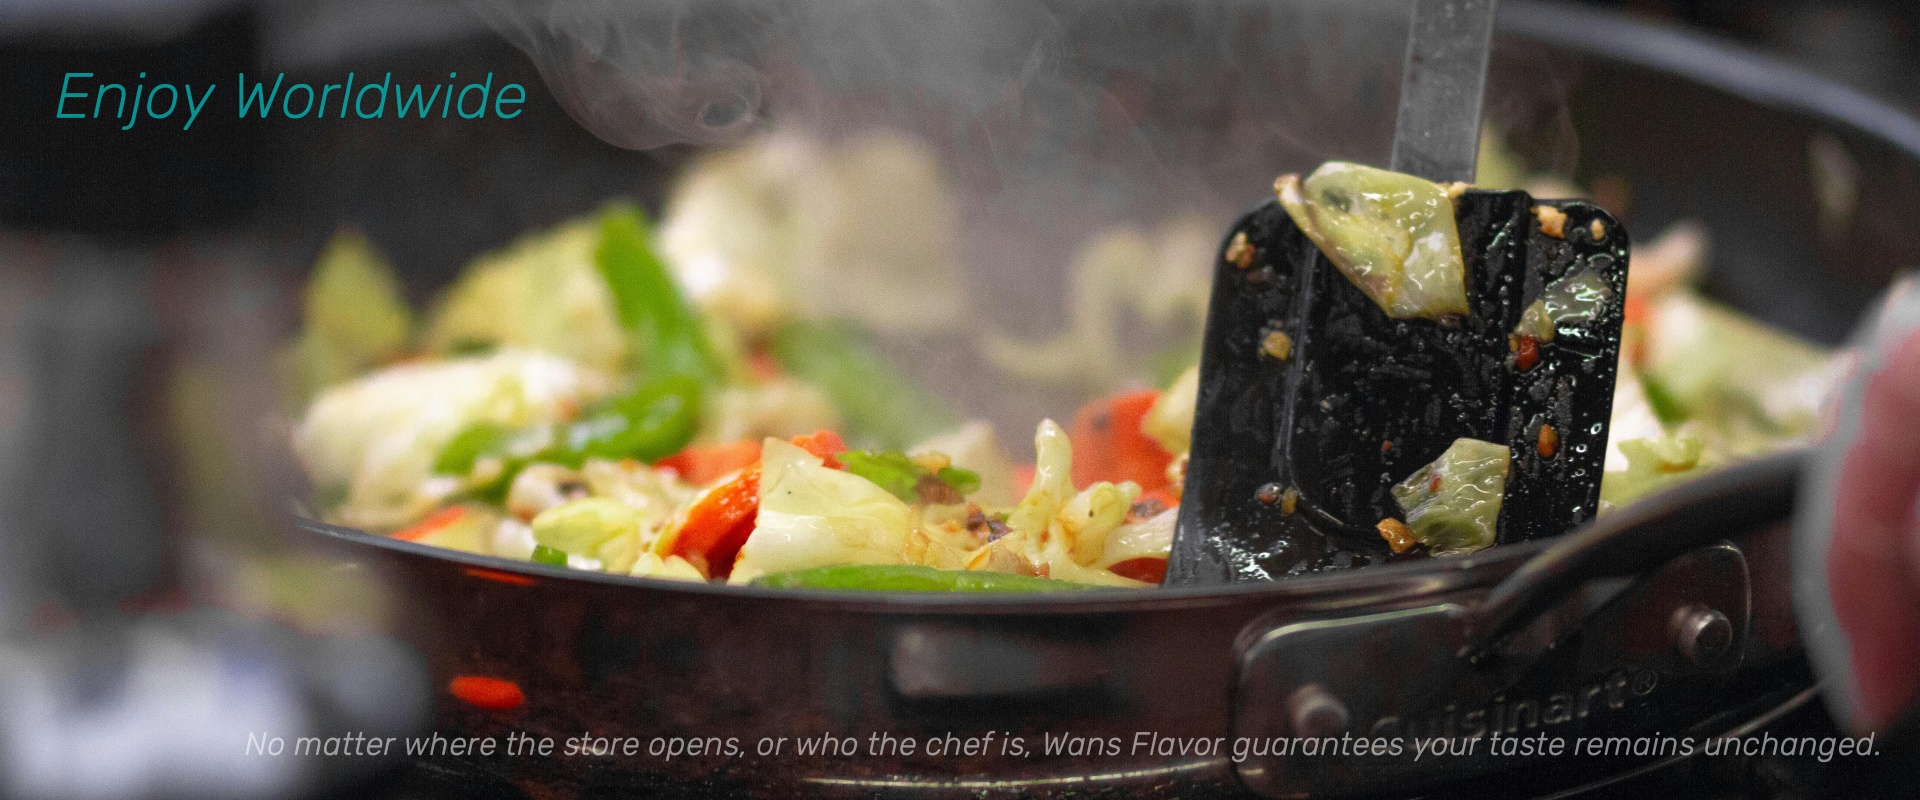 Technology Locks Fragrance, Standardized and Consistent, Enjoyed Worldwide
No matter where the store opens, no matter who the chef is, Wans Flavor always guarantees your taste remains unchanged.